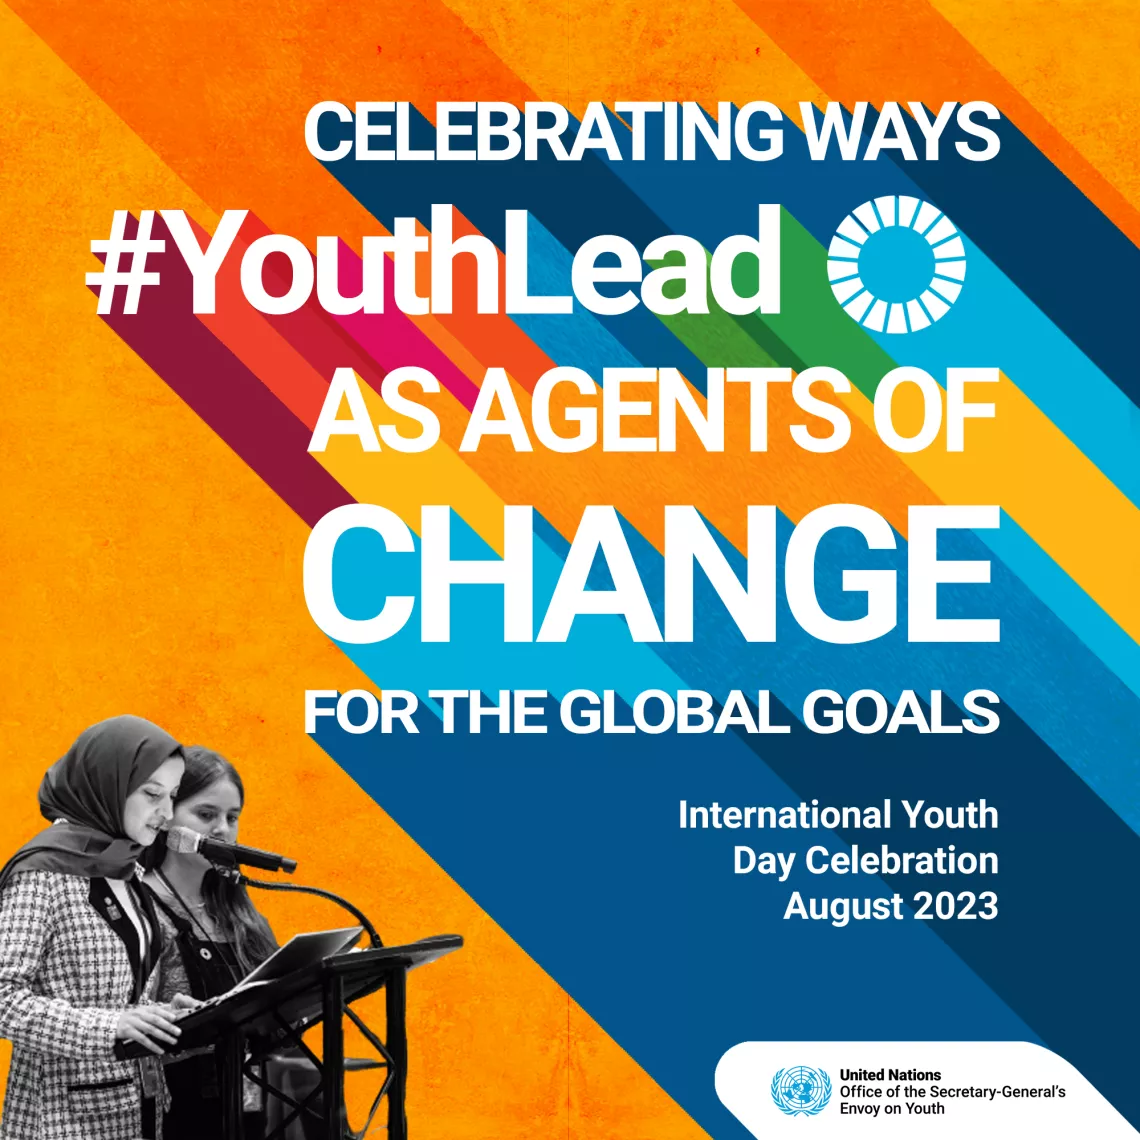 Two girls speaking in front of a microphone and text reading: "Celebrating ways #YouthLead as agents of change for the Global Goals. International Youth Day Celebration - August 2023"